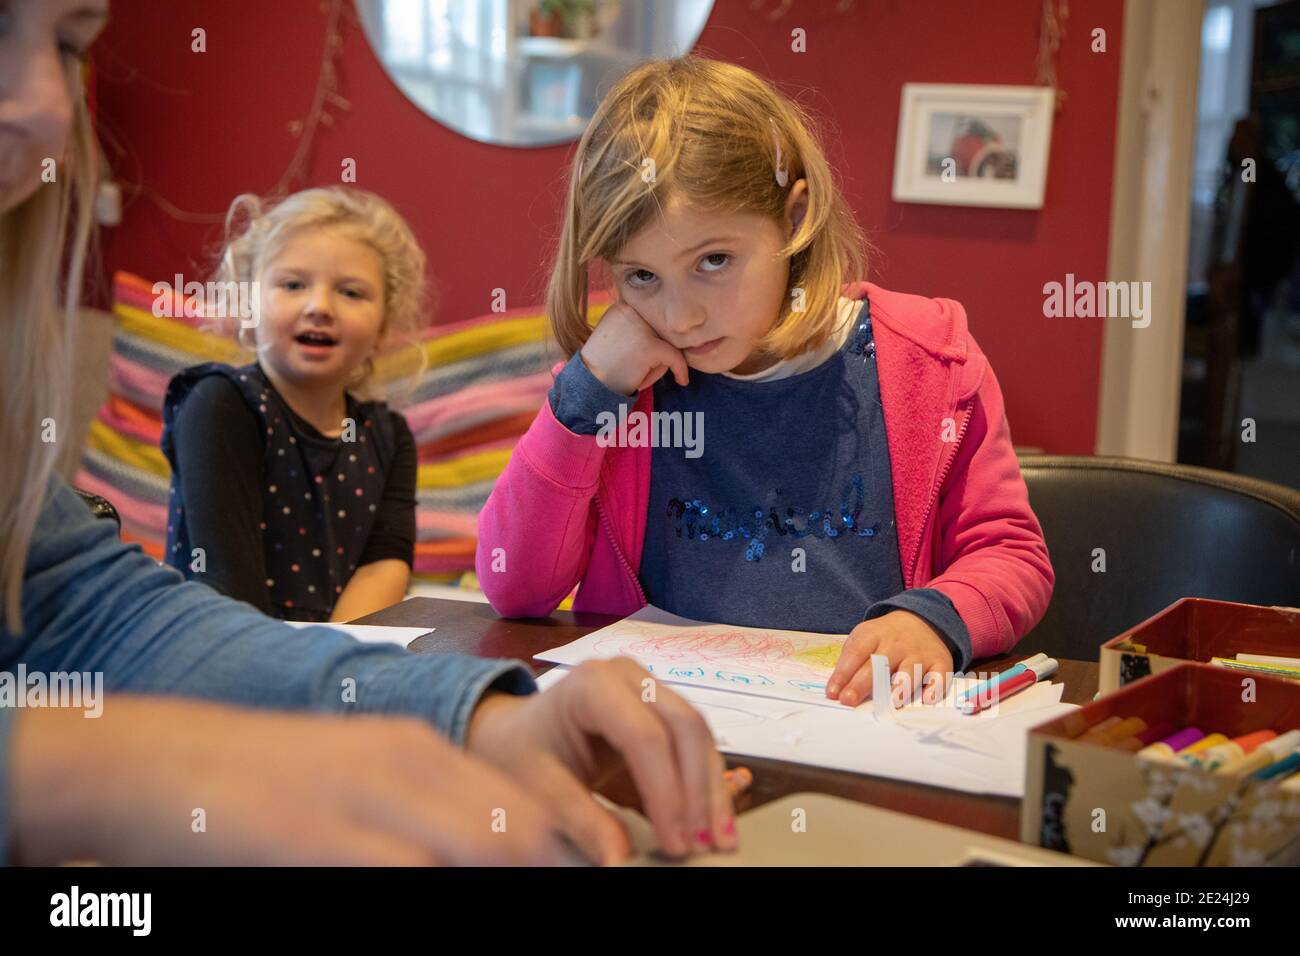 Girls of 3 and 5 years old doing school work with their mum at home during the Covid school closure. Stock Photo